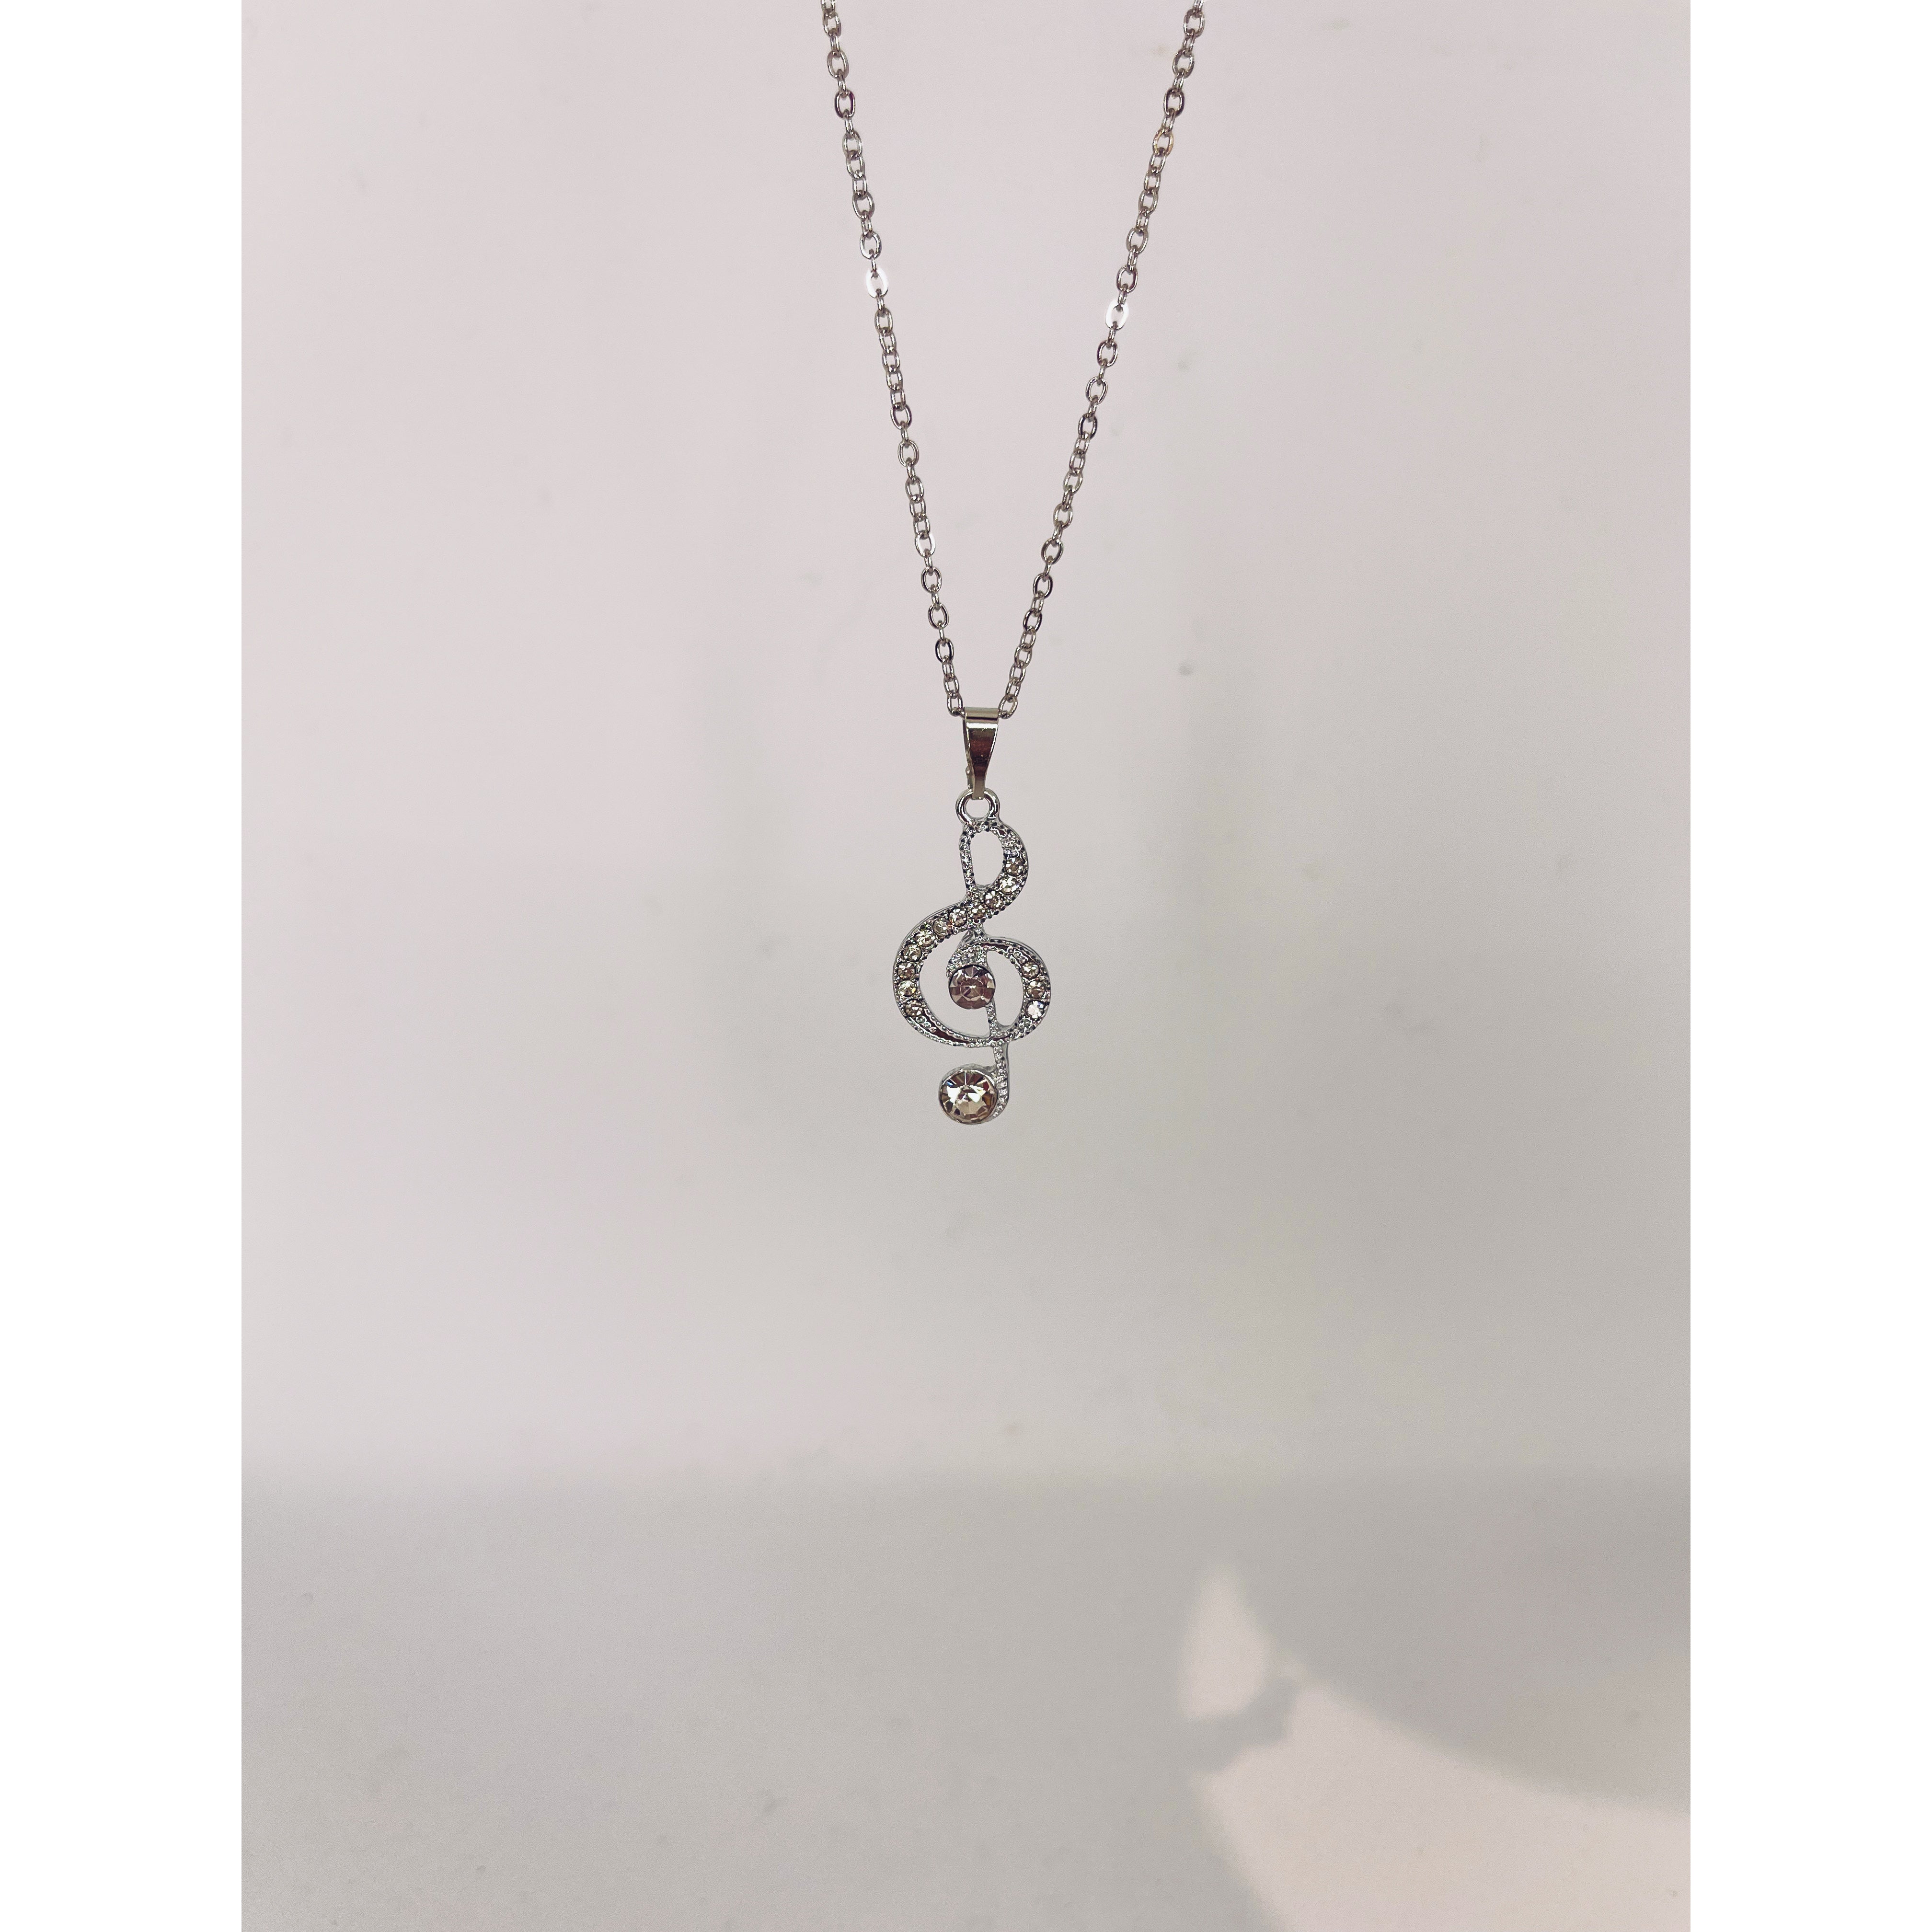 Music Clef Necklace